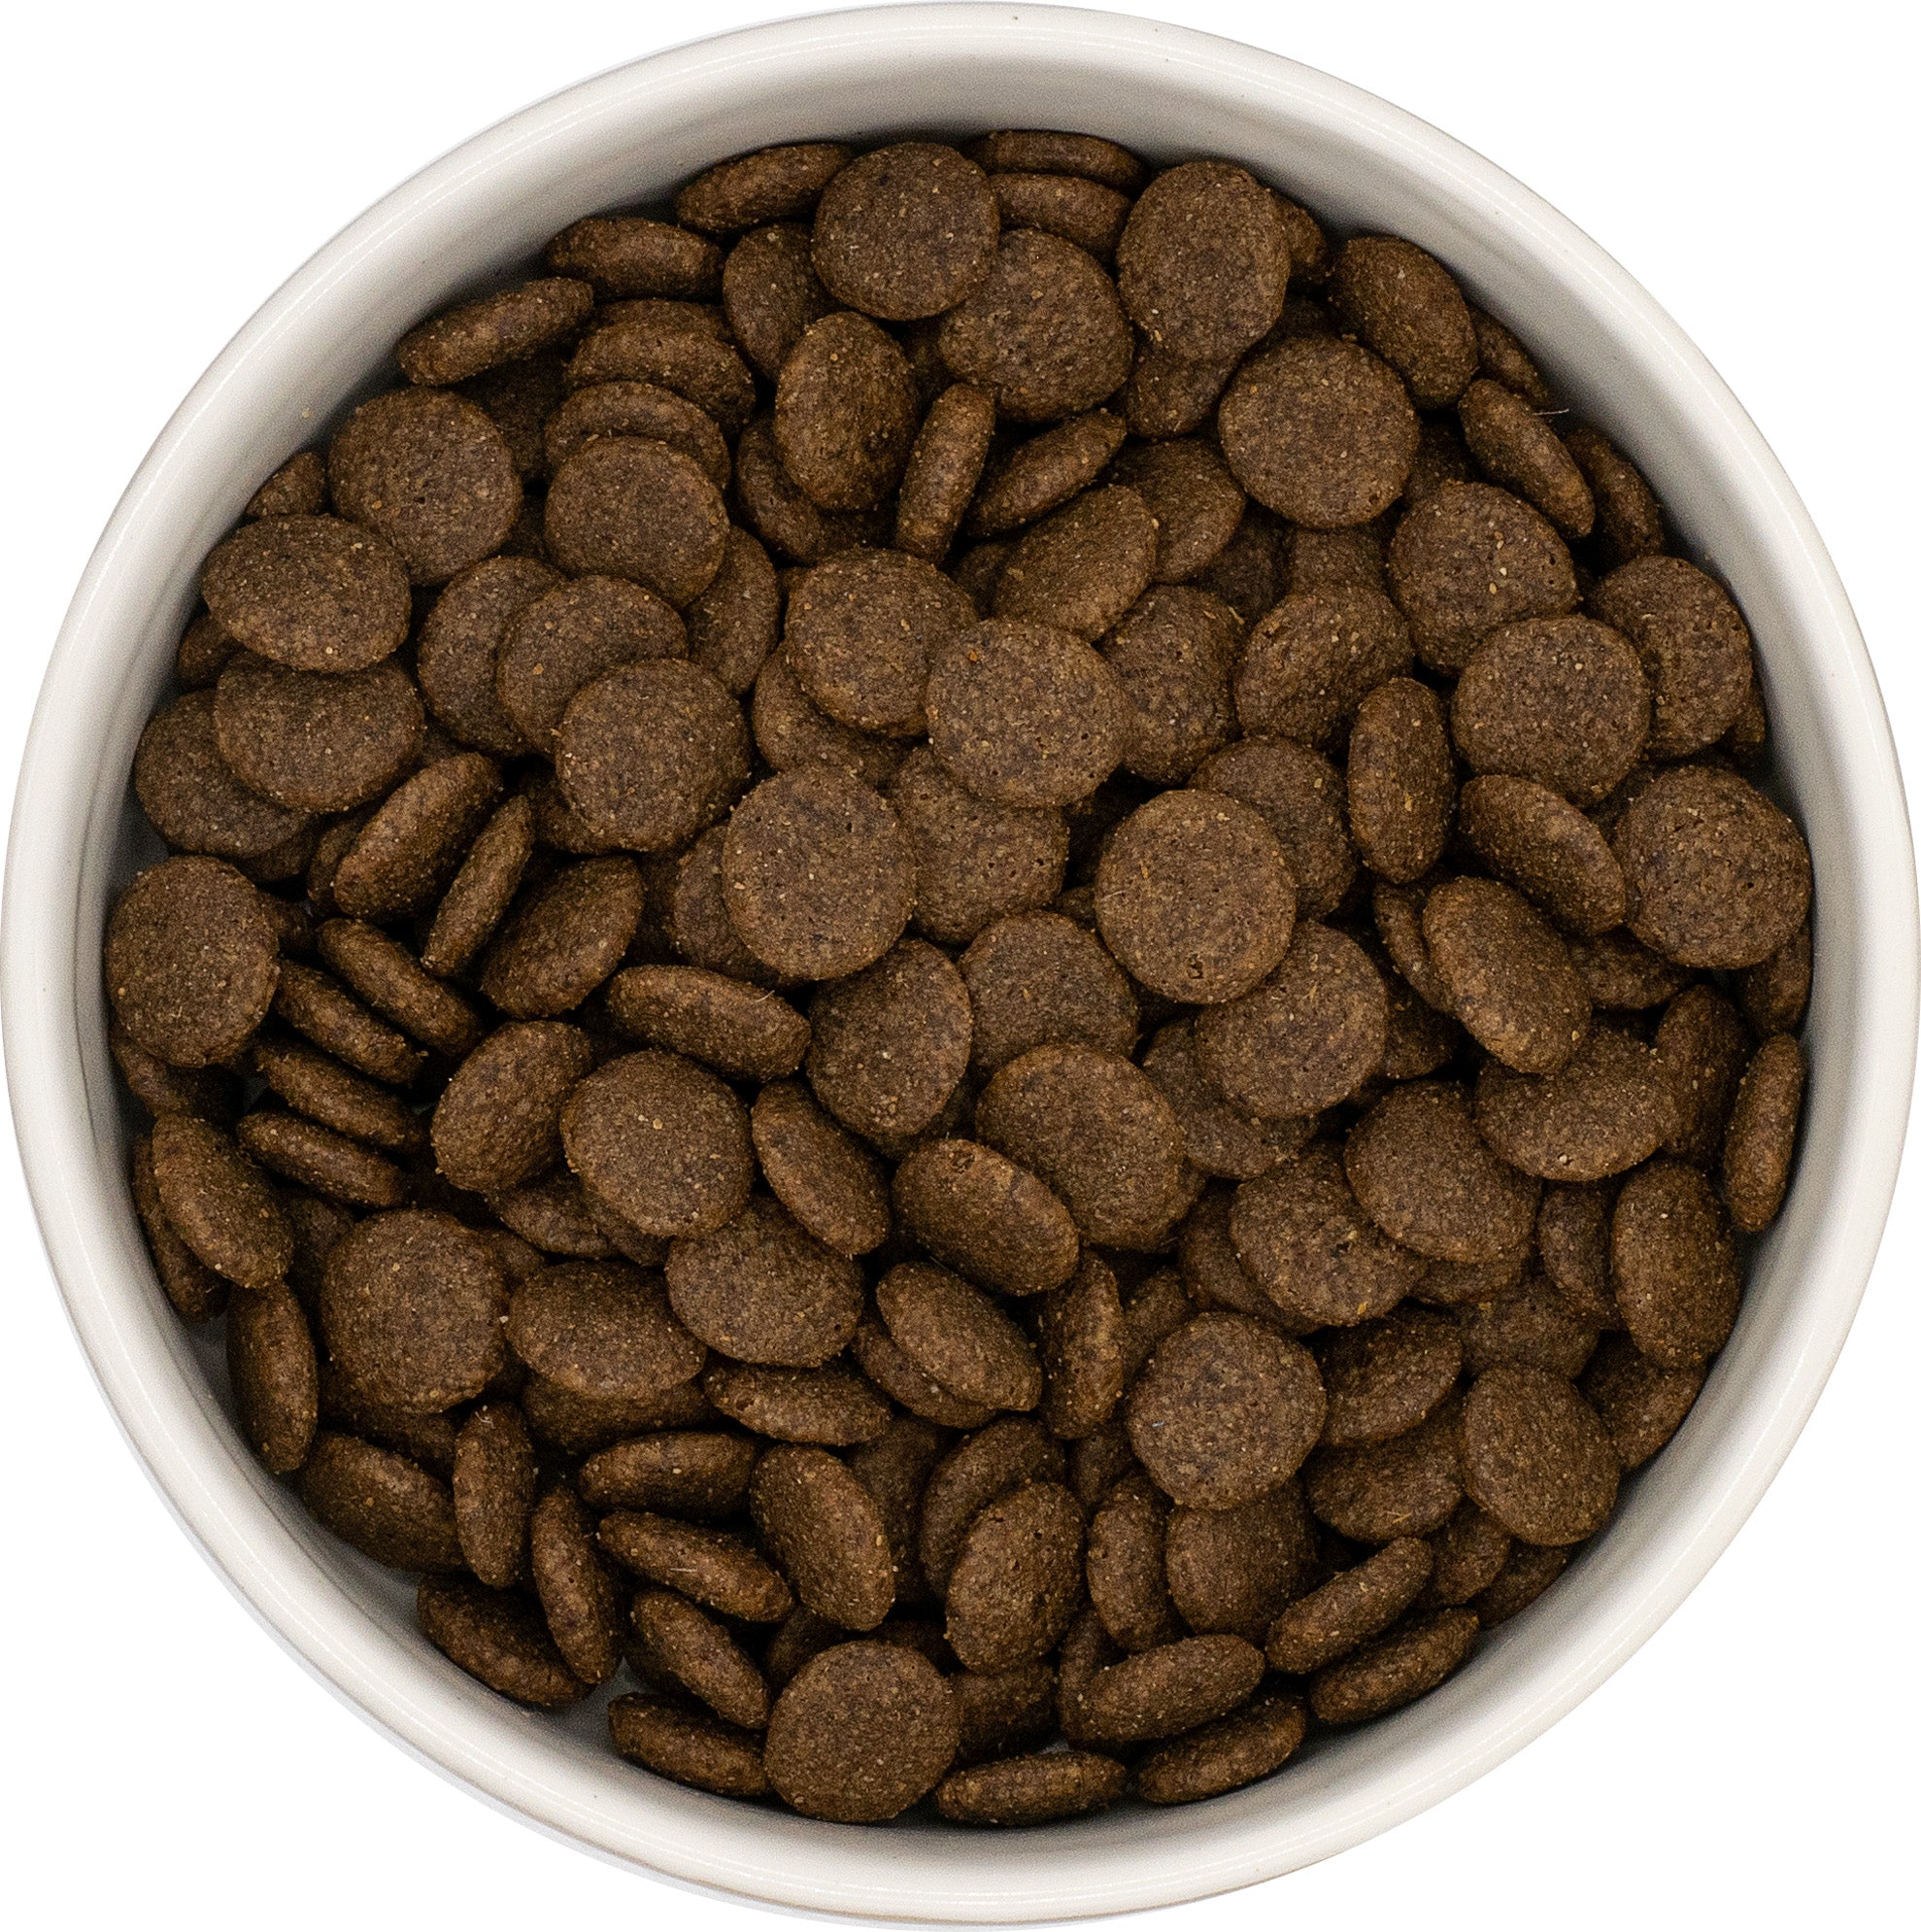 Aberdeen Angus beef grain free dog food for adult dogs